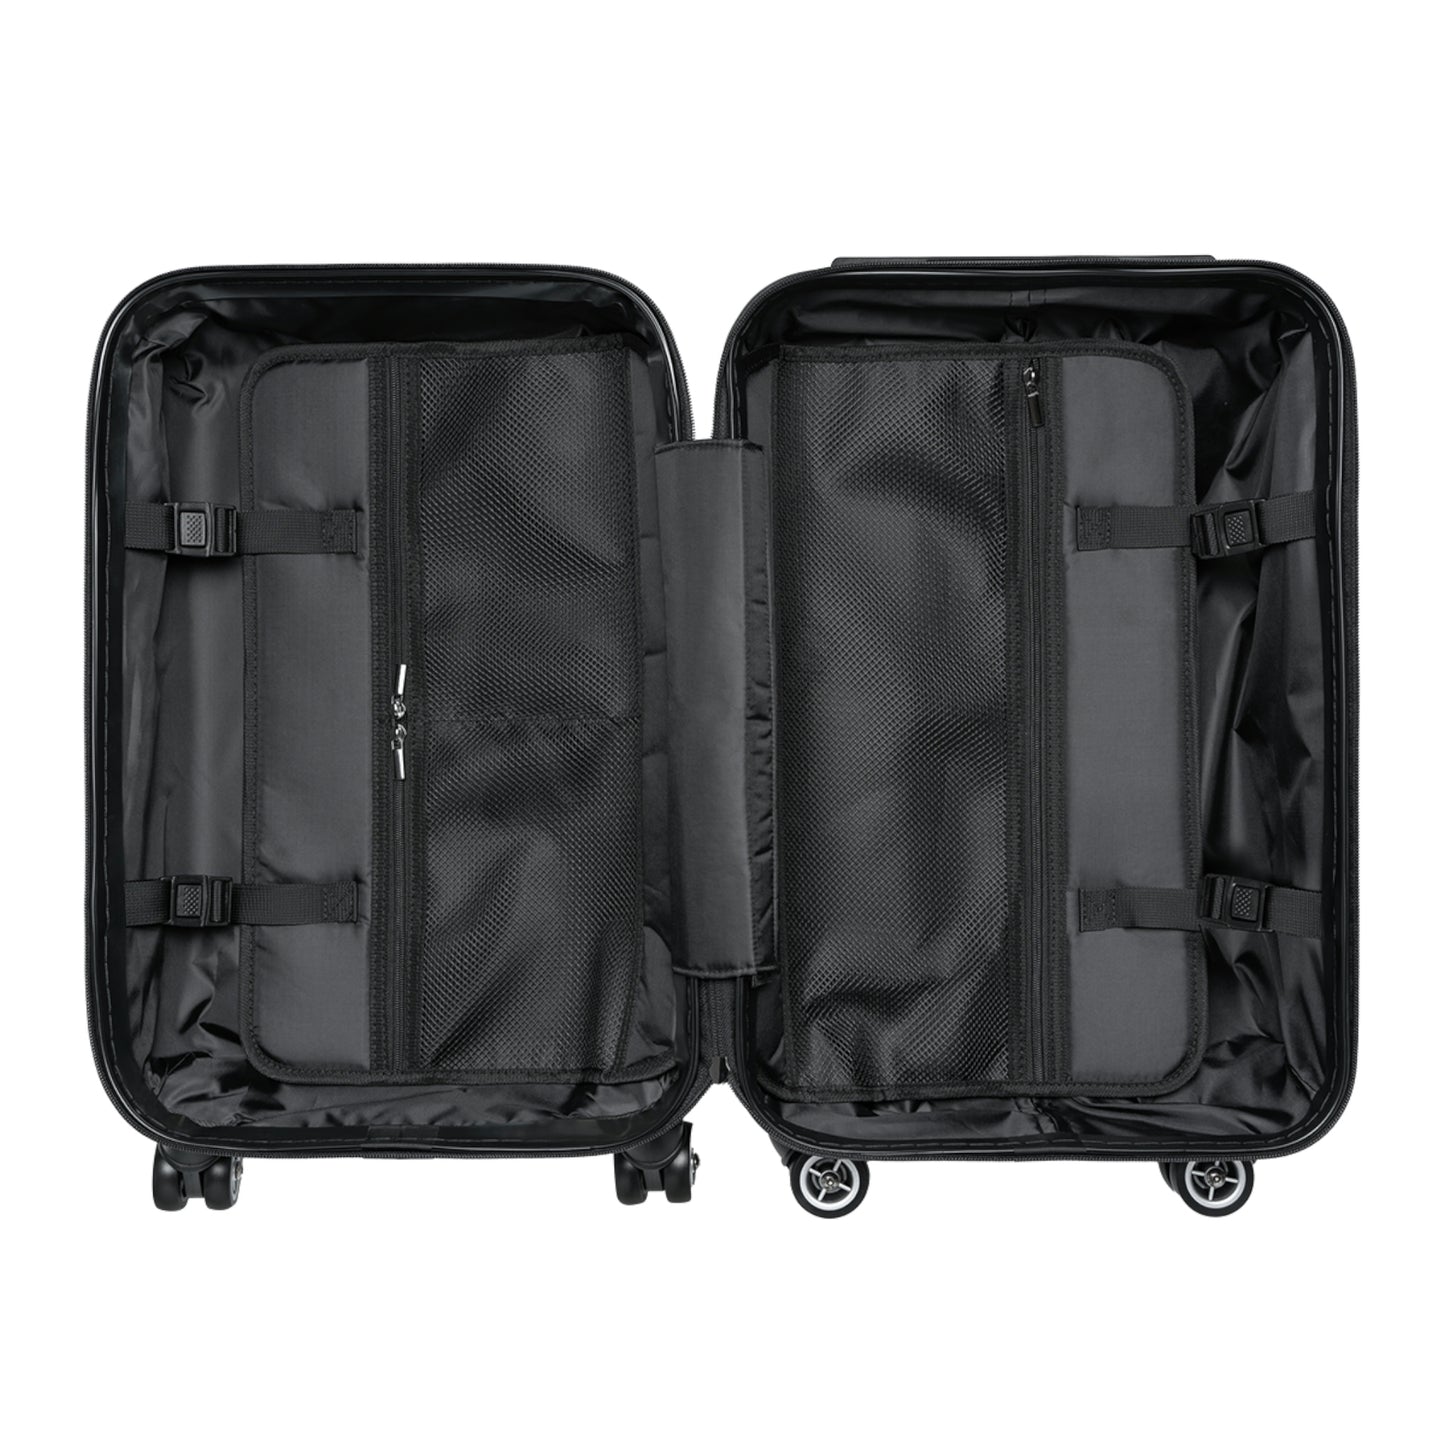 OFF TO THE NEXT RAVE - Suitcases (AVAILABLE IN 3 SIZES)